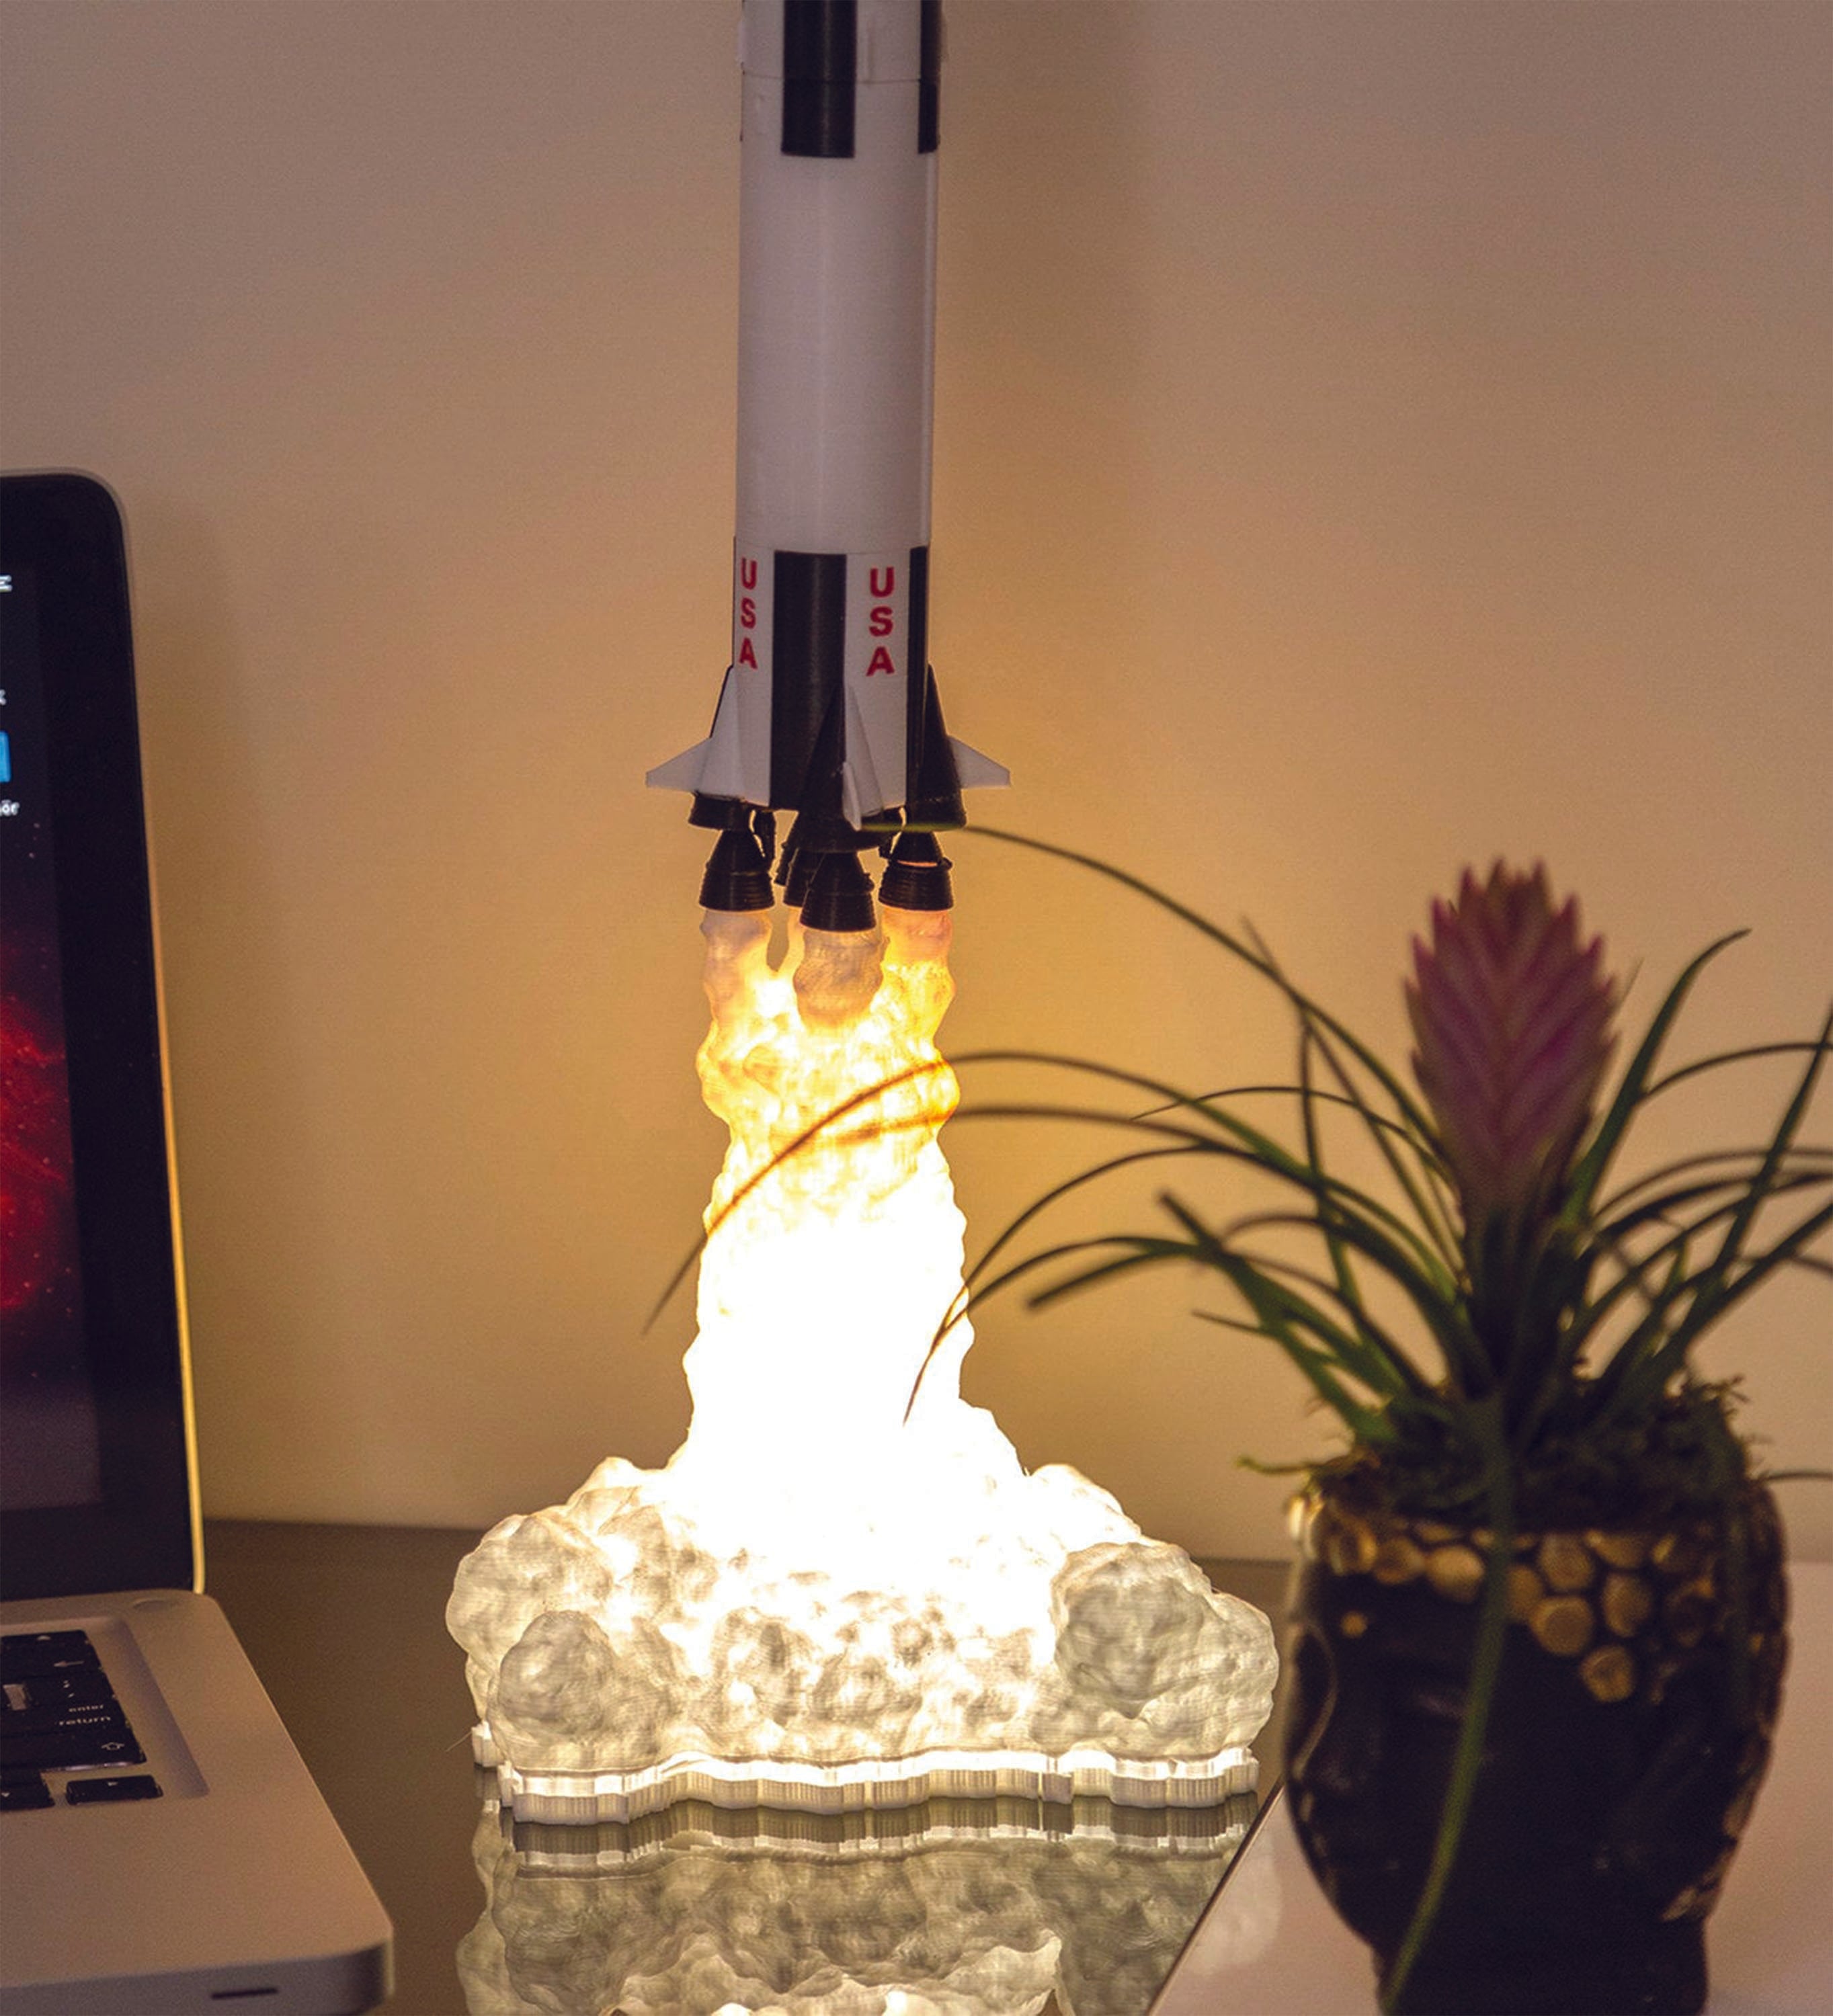 Historic Moon Apollo 11 Mission Lamp Perfect Gift for NASA & Astronomy Lovers!